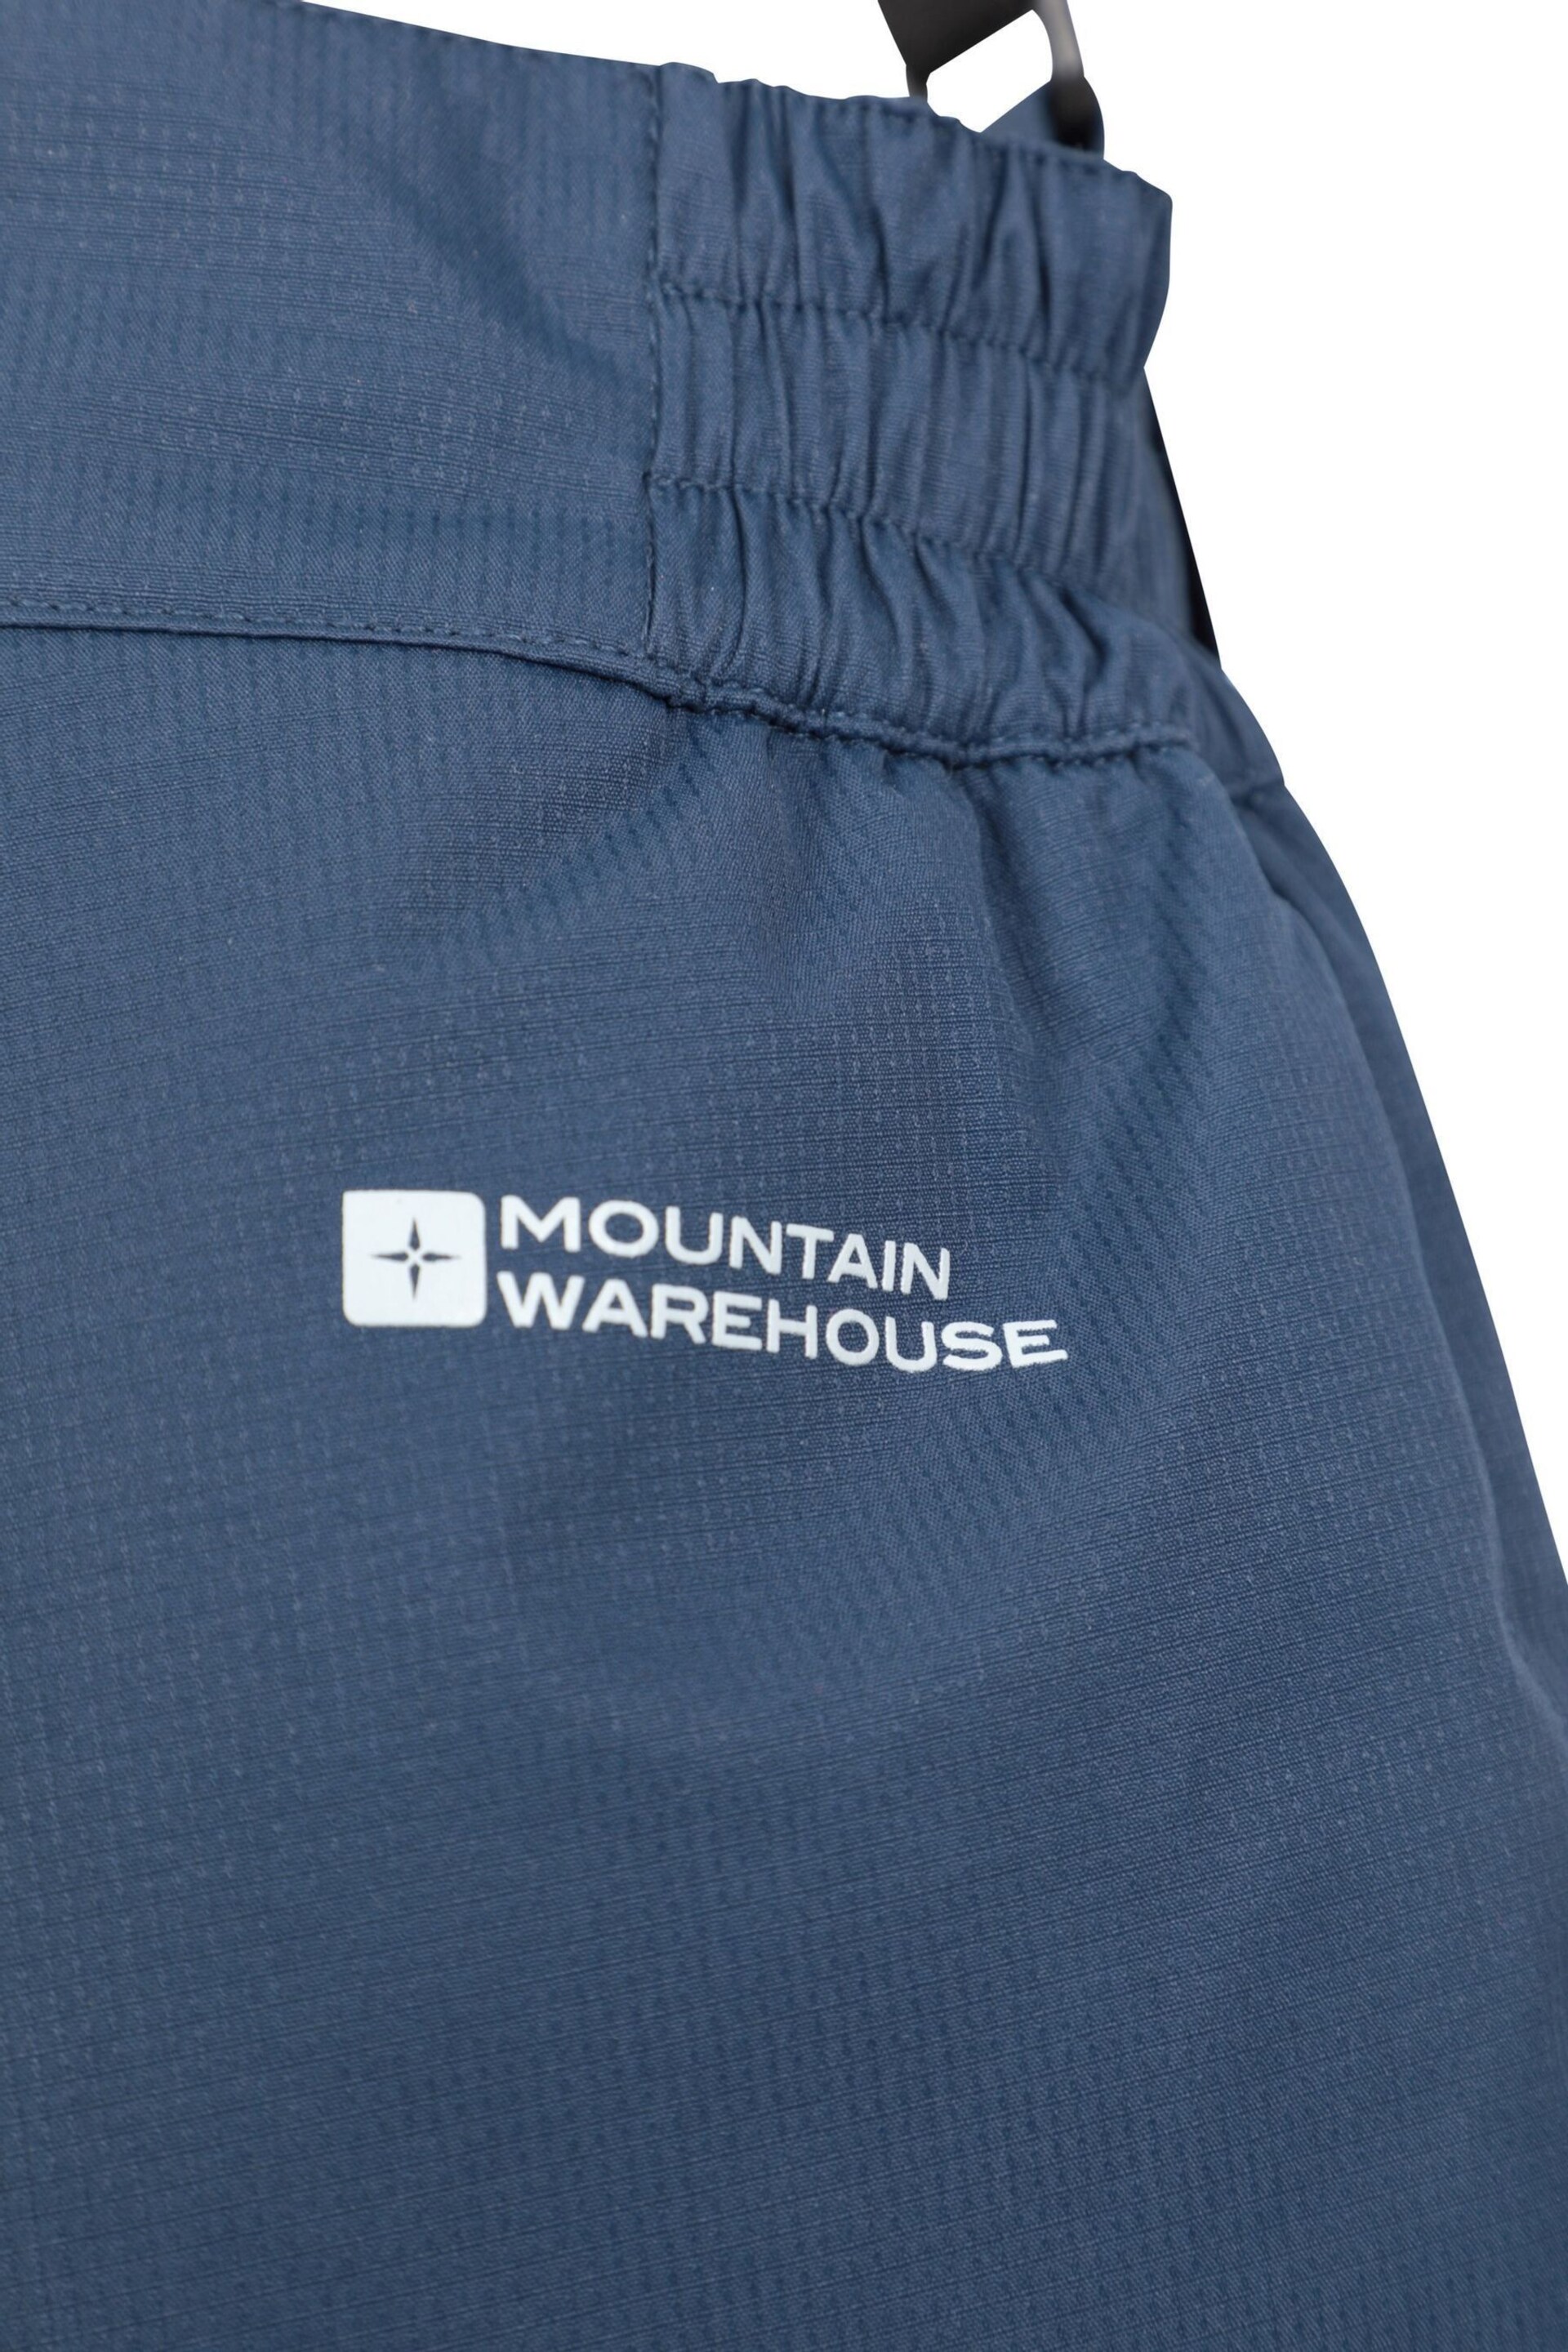 Mountain Warehouse Blue Raptor Kids Snow Trousers - Image 5 of 5